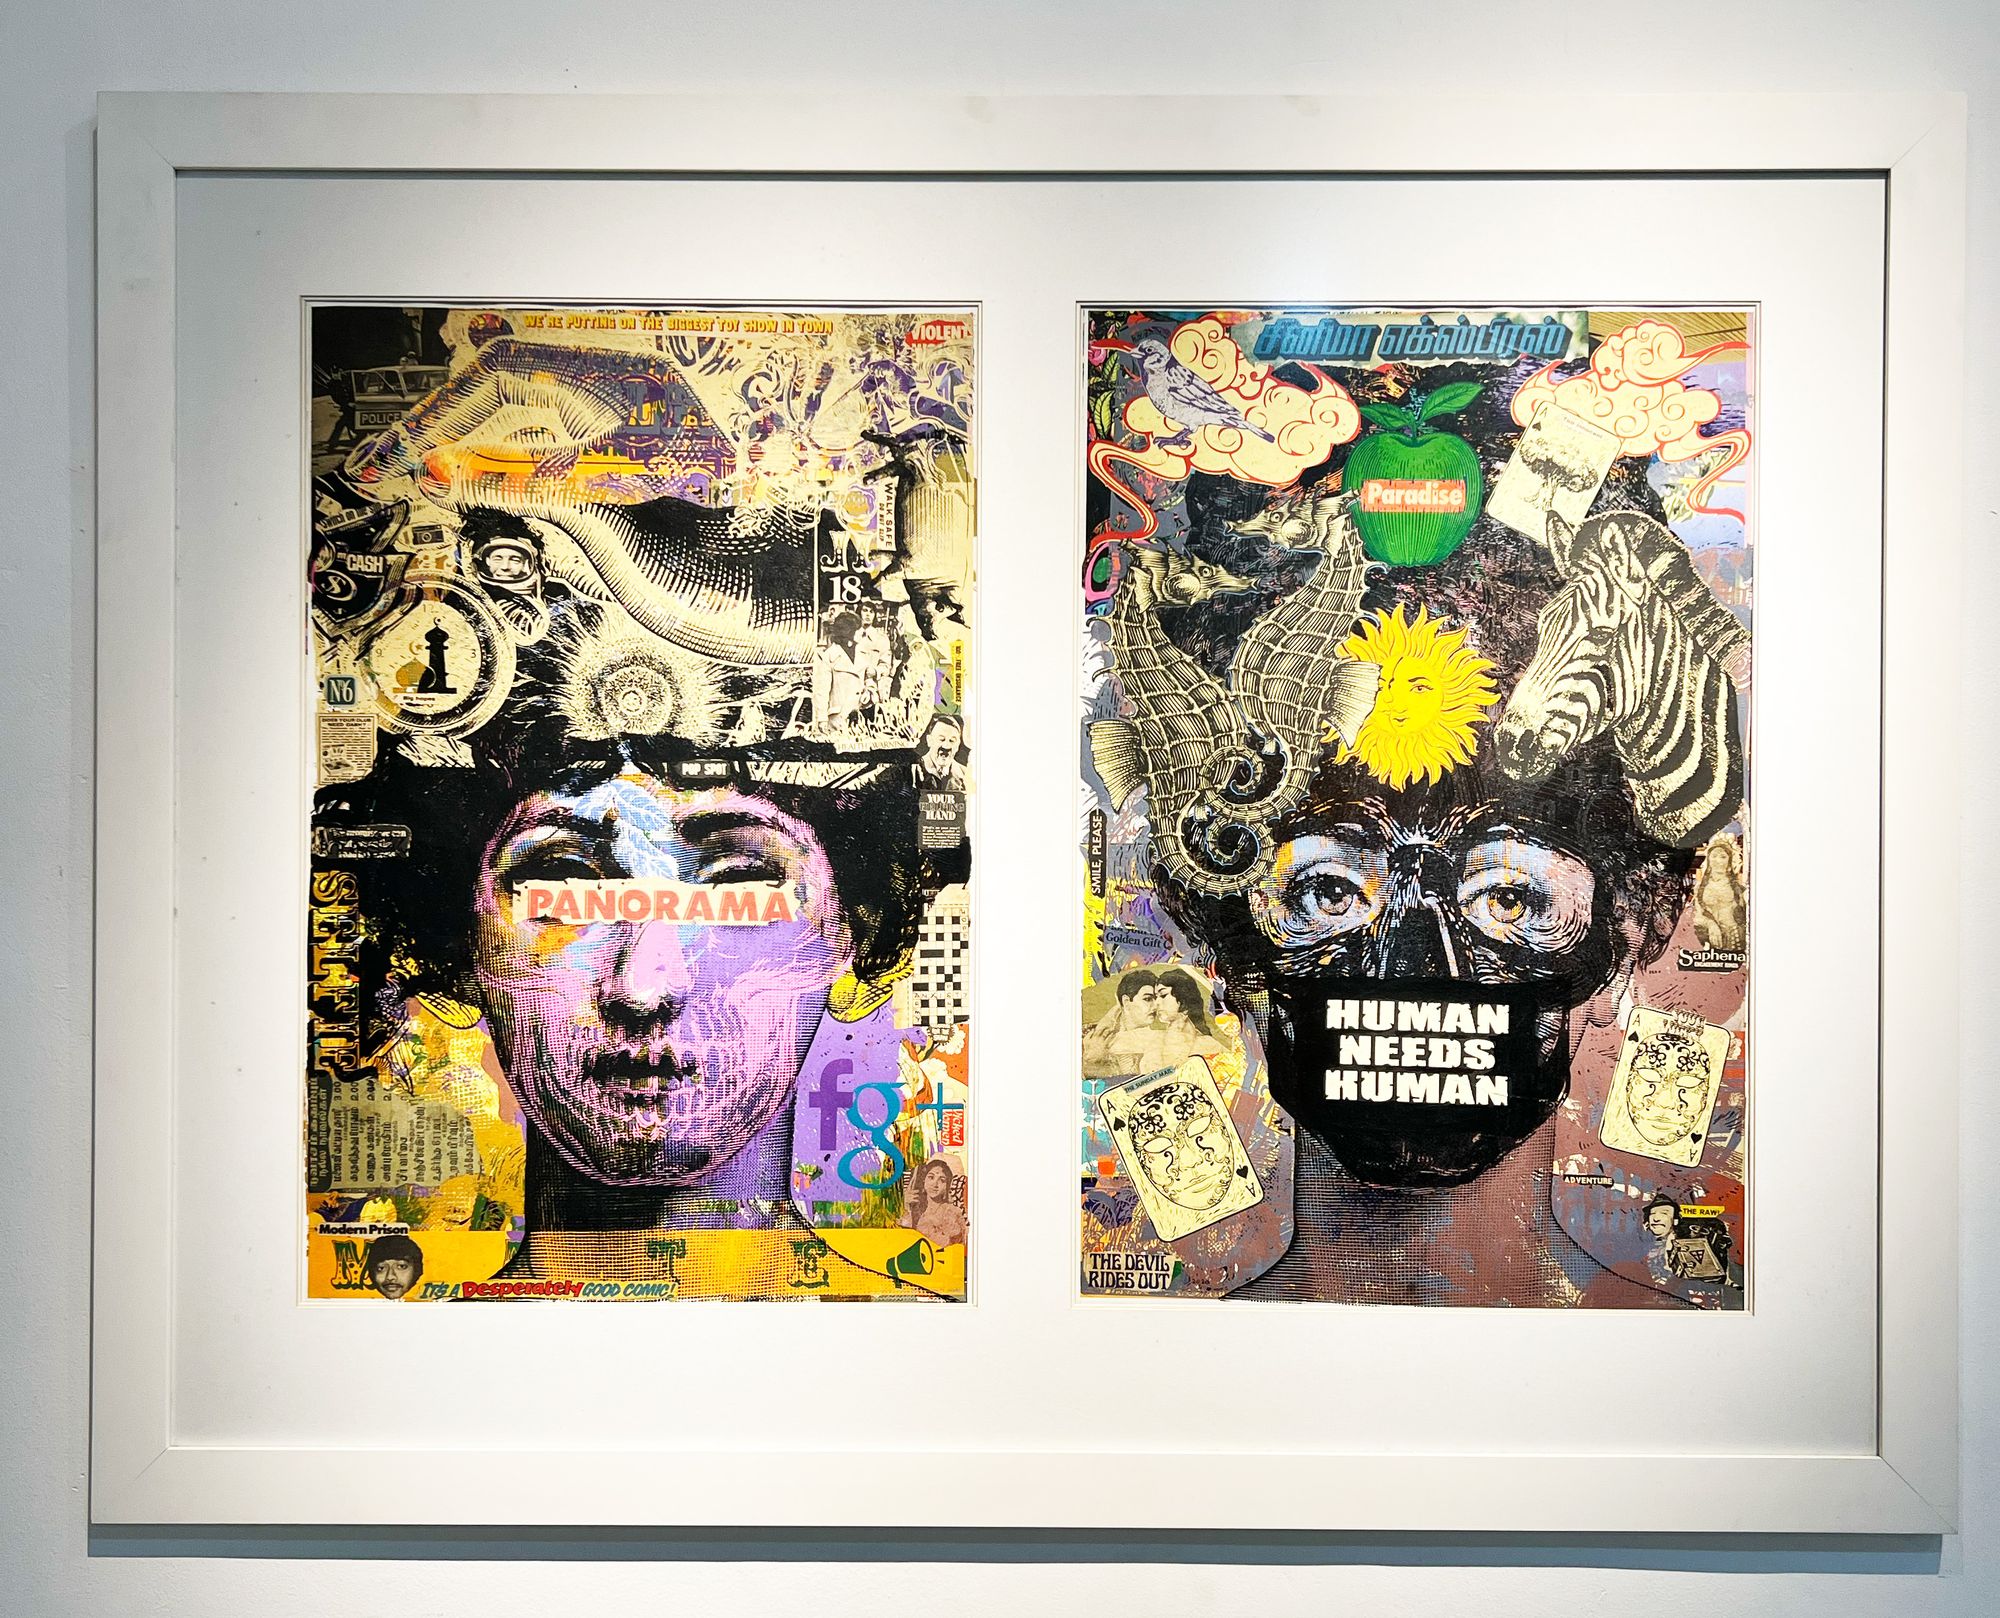 Warhol-inspired durian prints: From experiment to exhibition